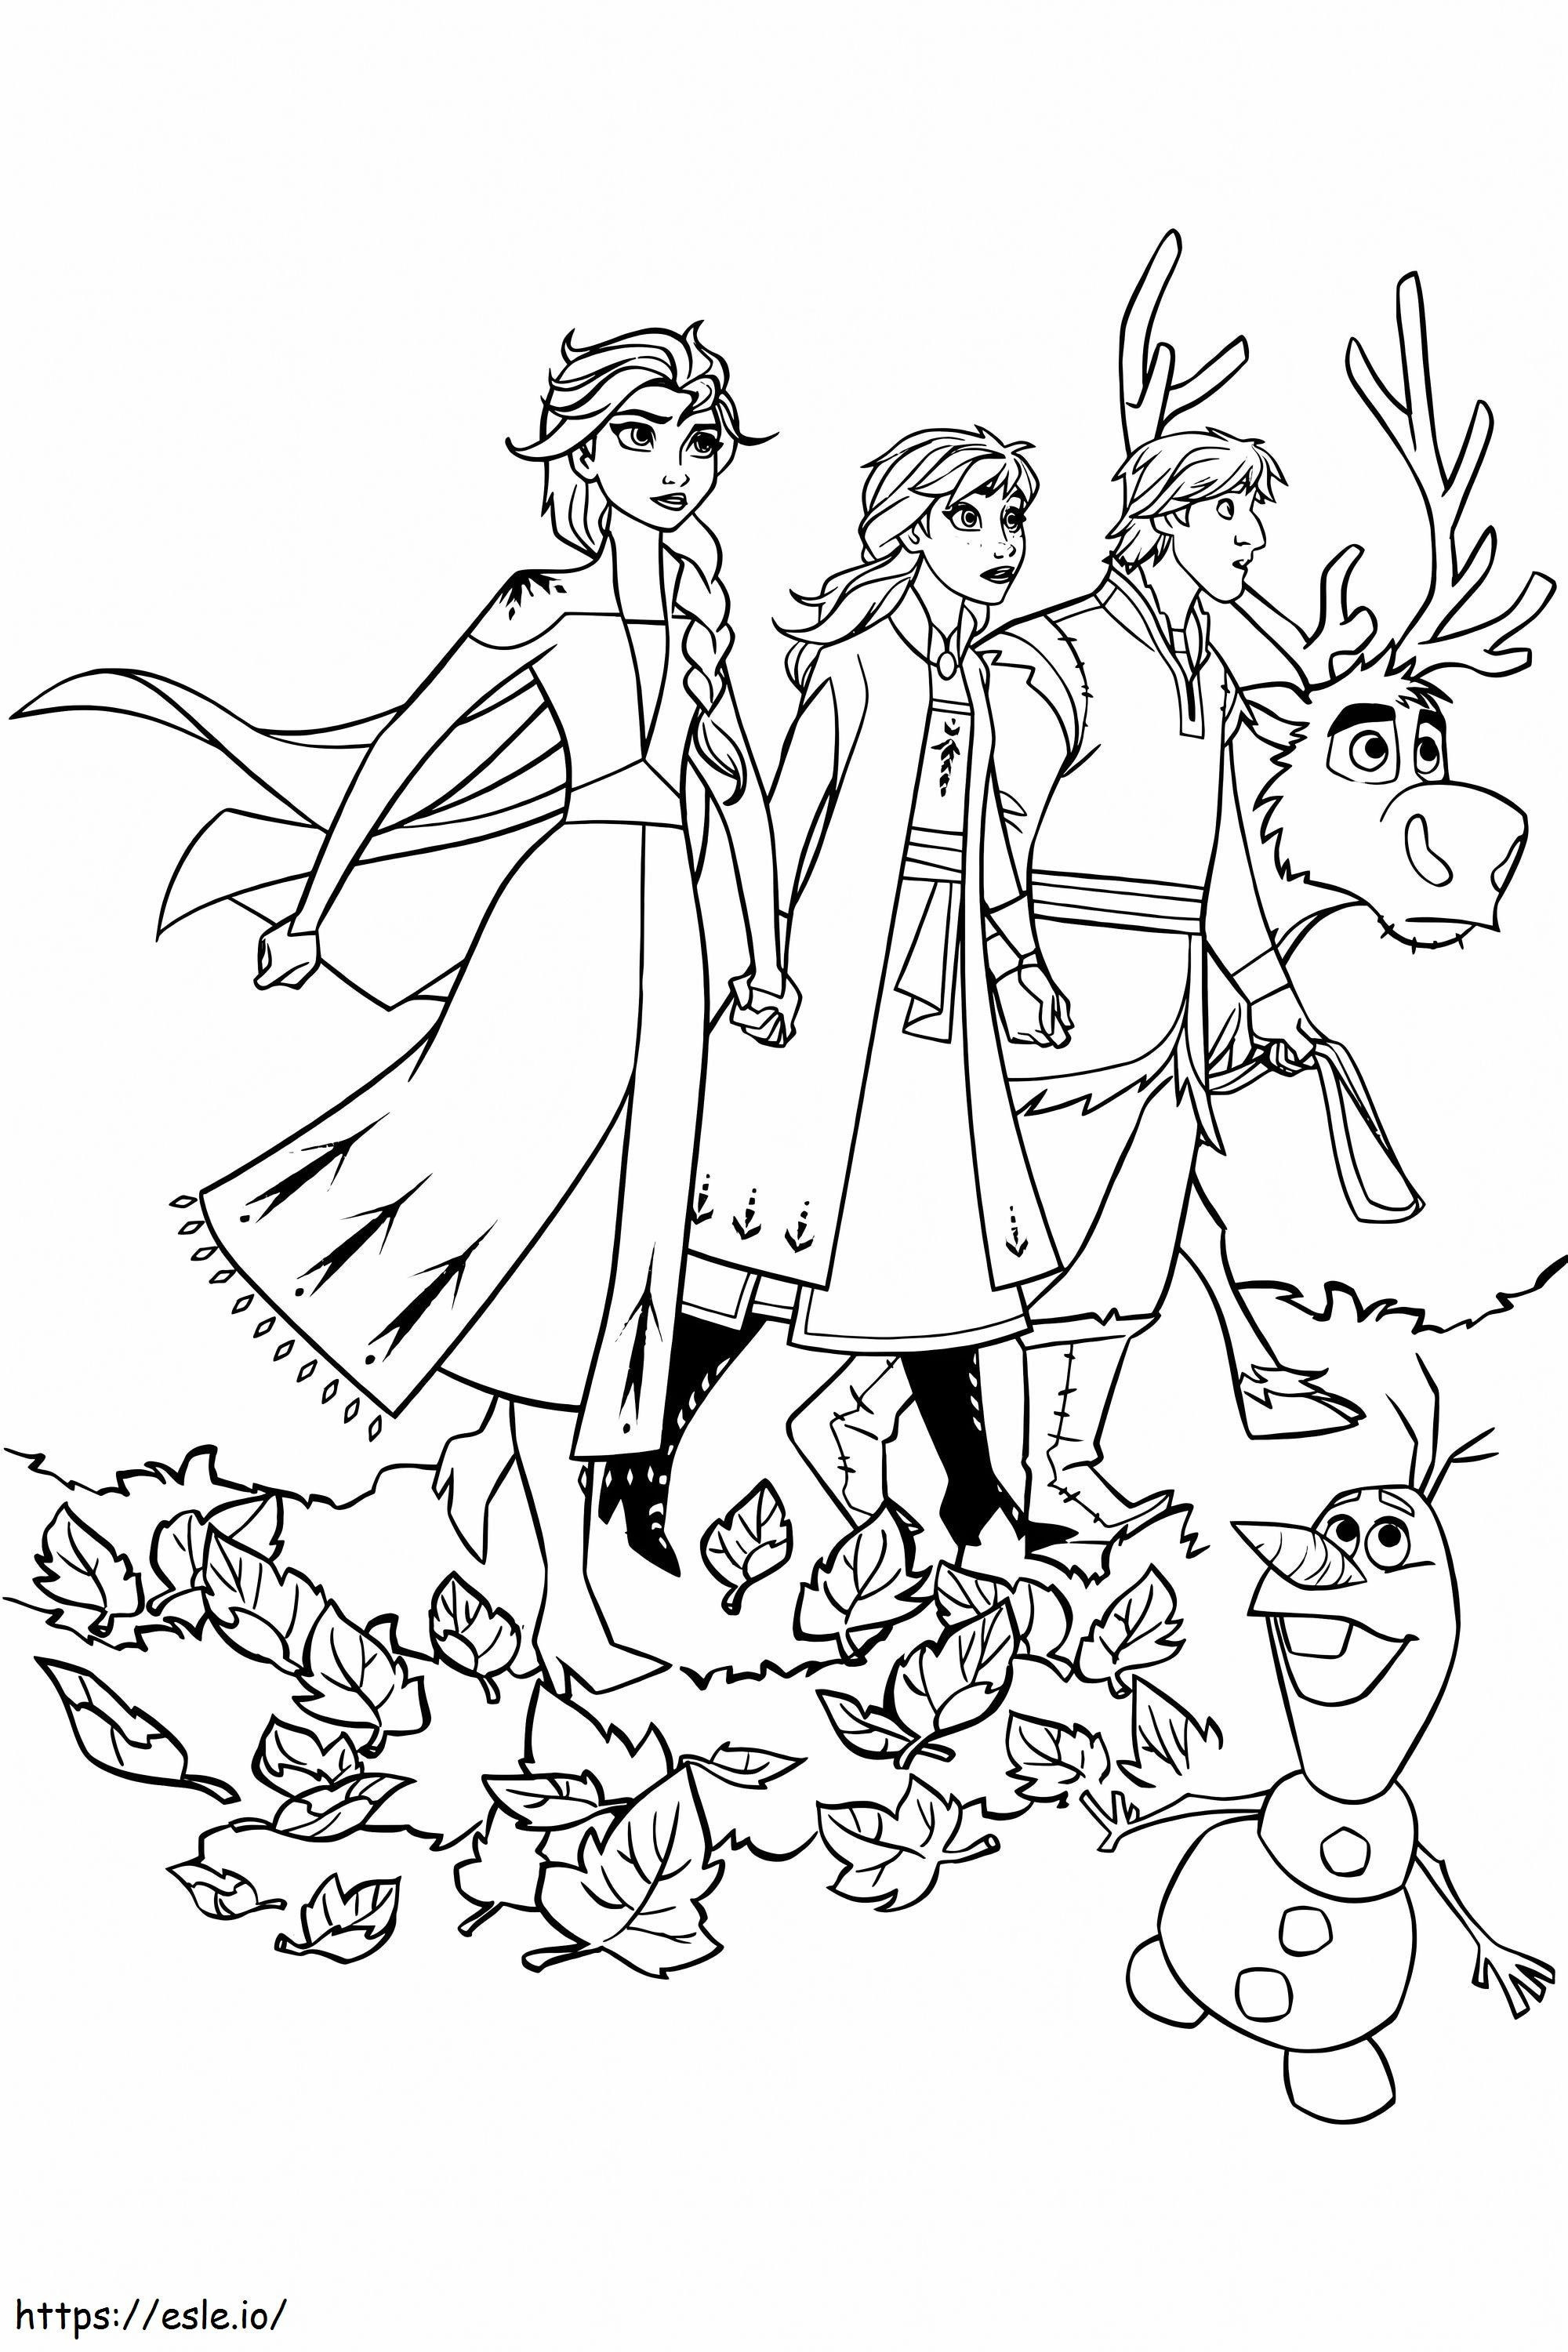 The Snow Queen 2 Characters 1 coloring page